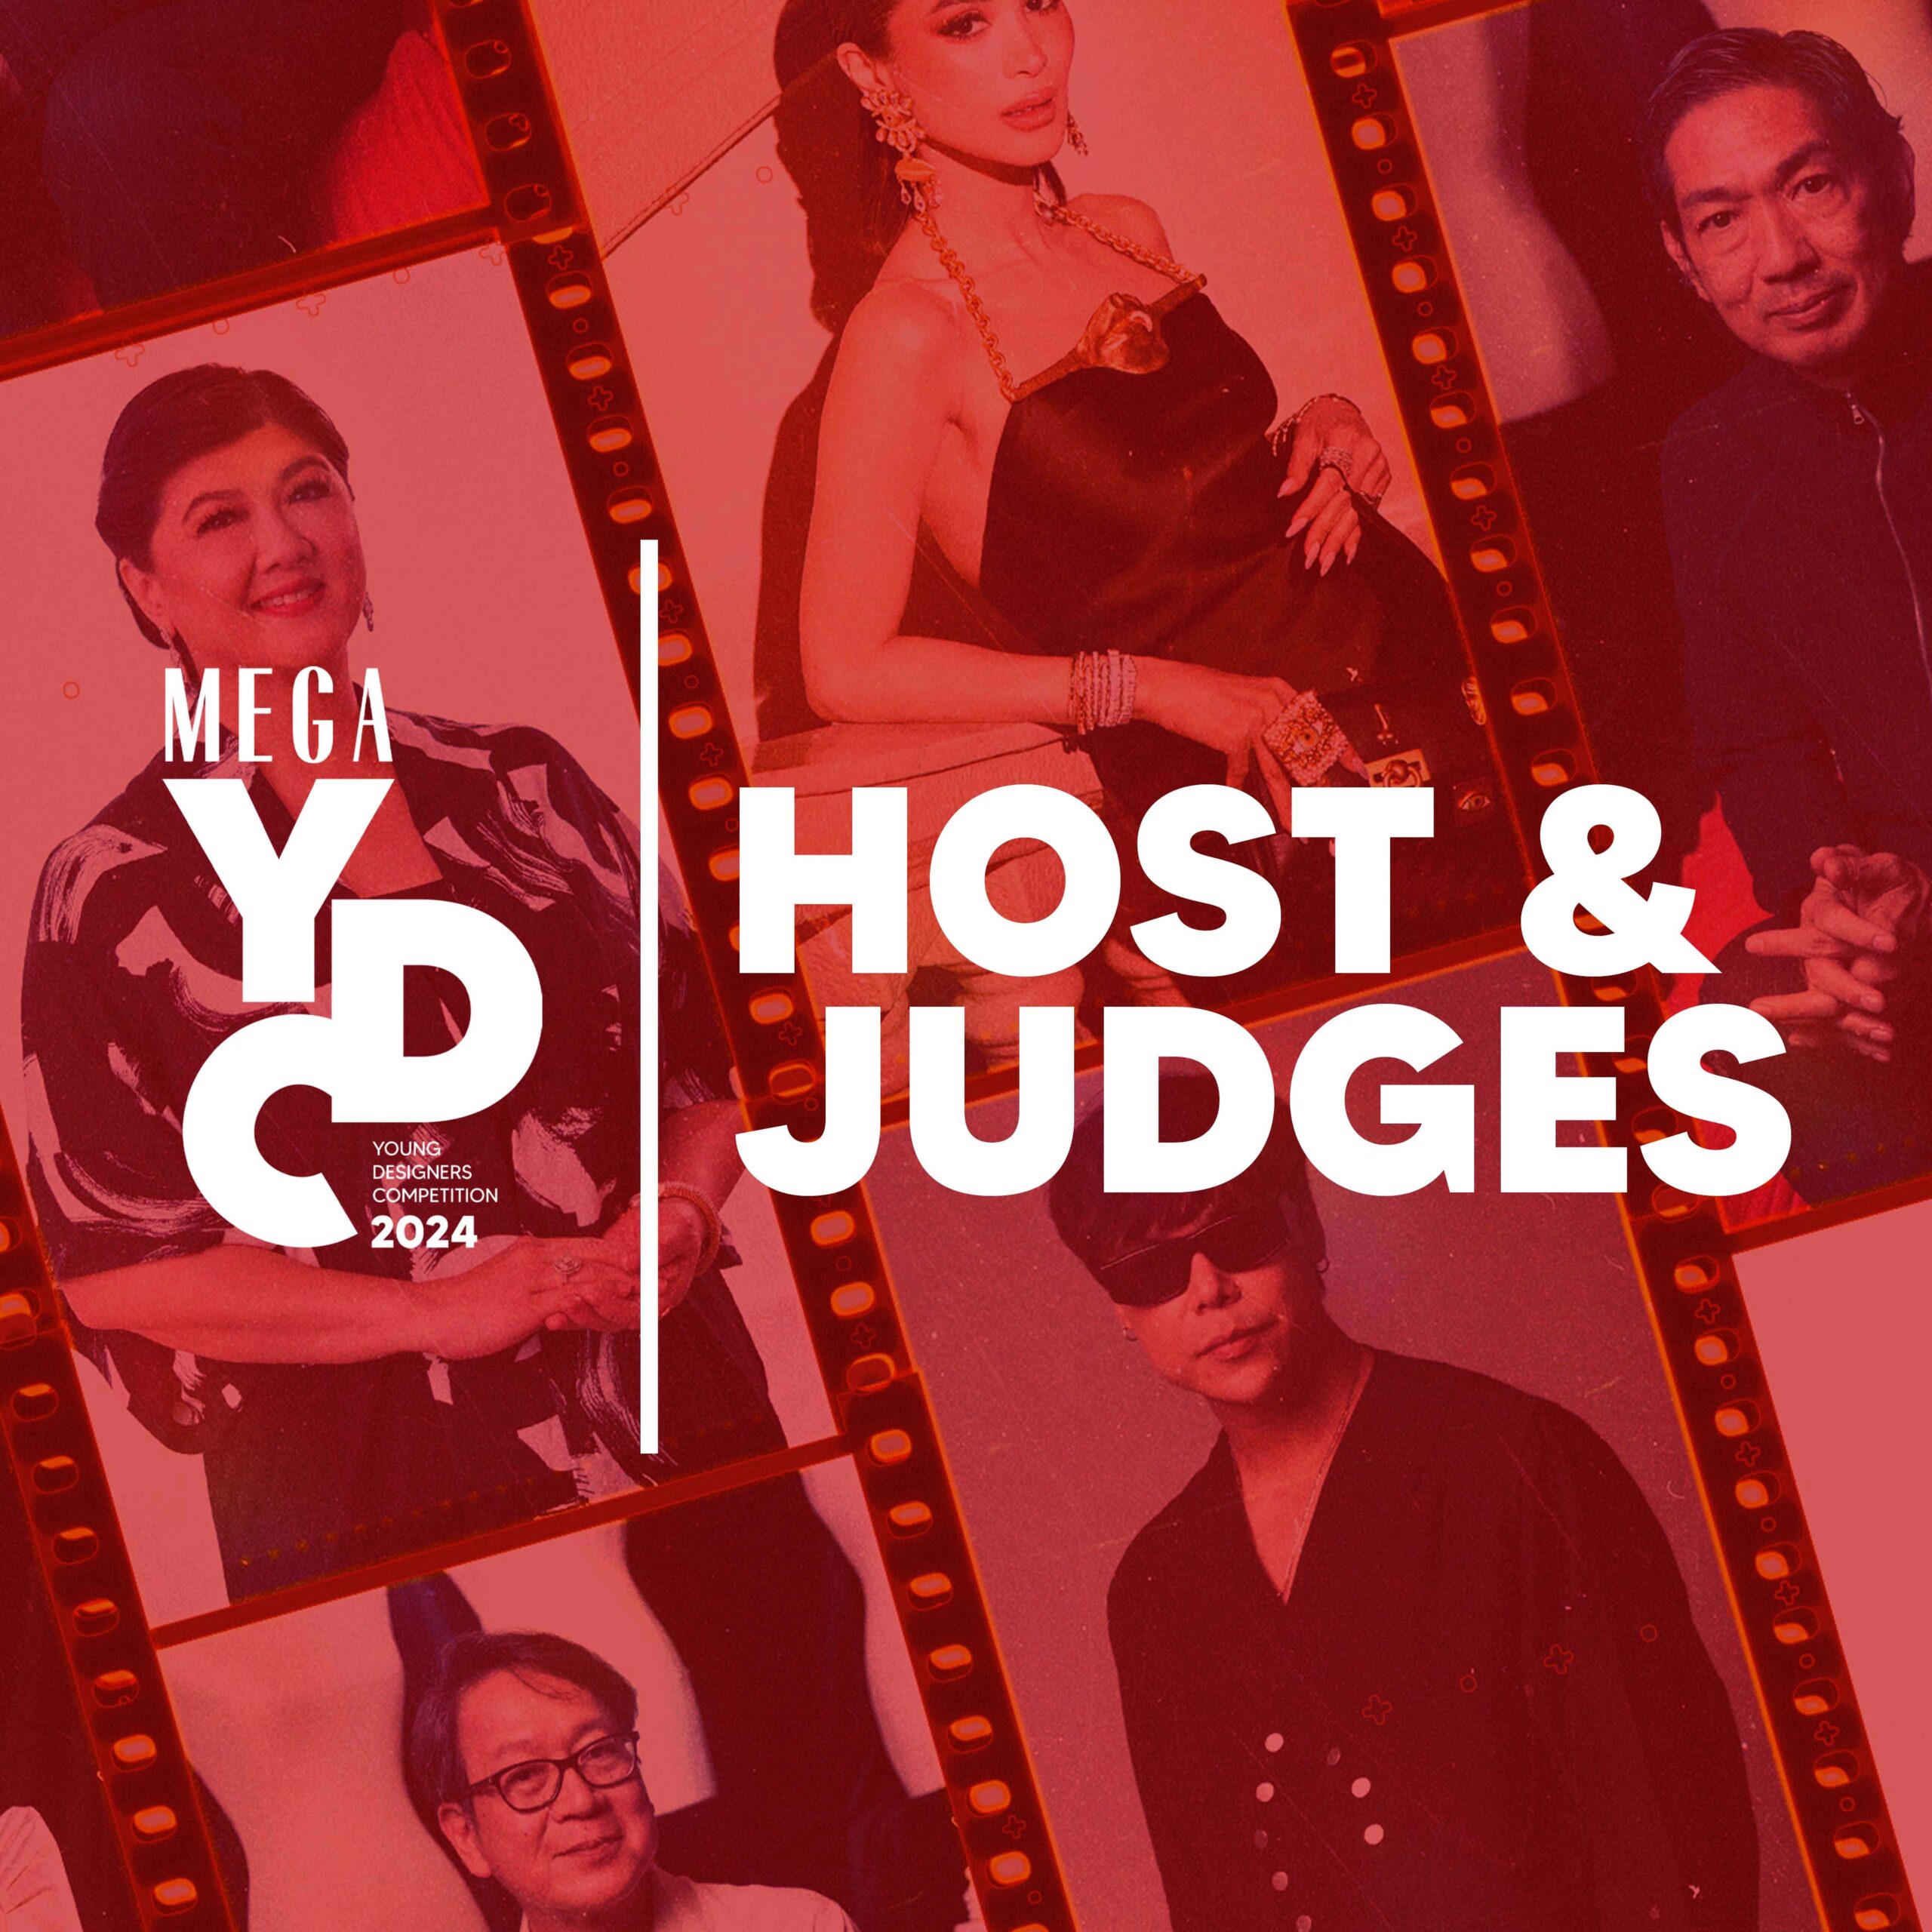 Meet the Host and Judges of the MEGA Young Designers Competition 2024